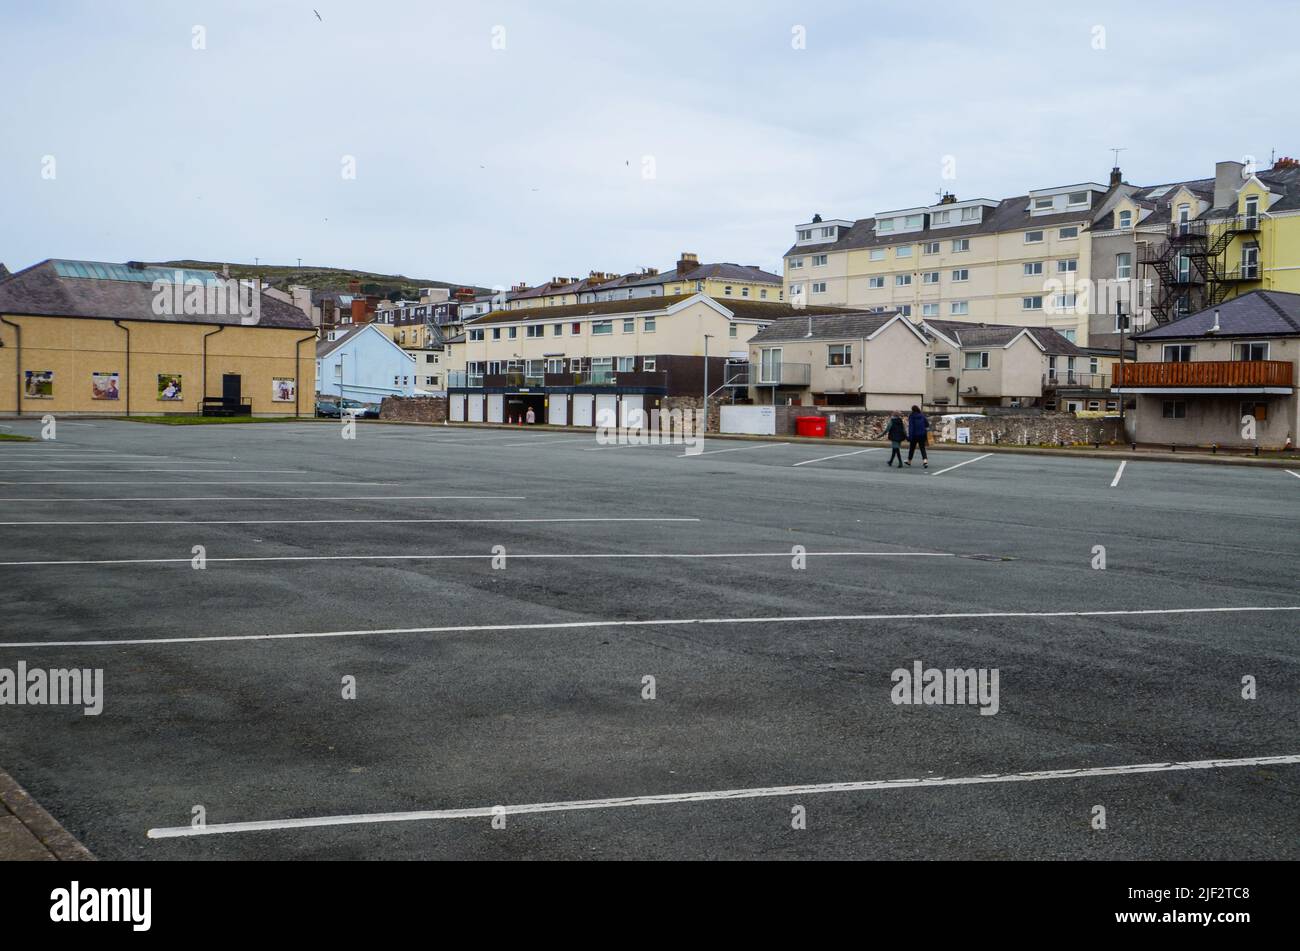 Llandudno, UK. Apr 10, 2022. The large coach park and drop off point on Mostyn Broadway is empty Stock Photo